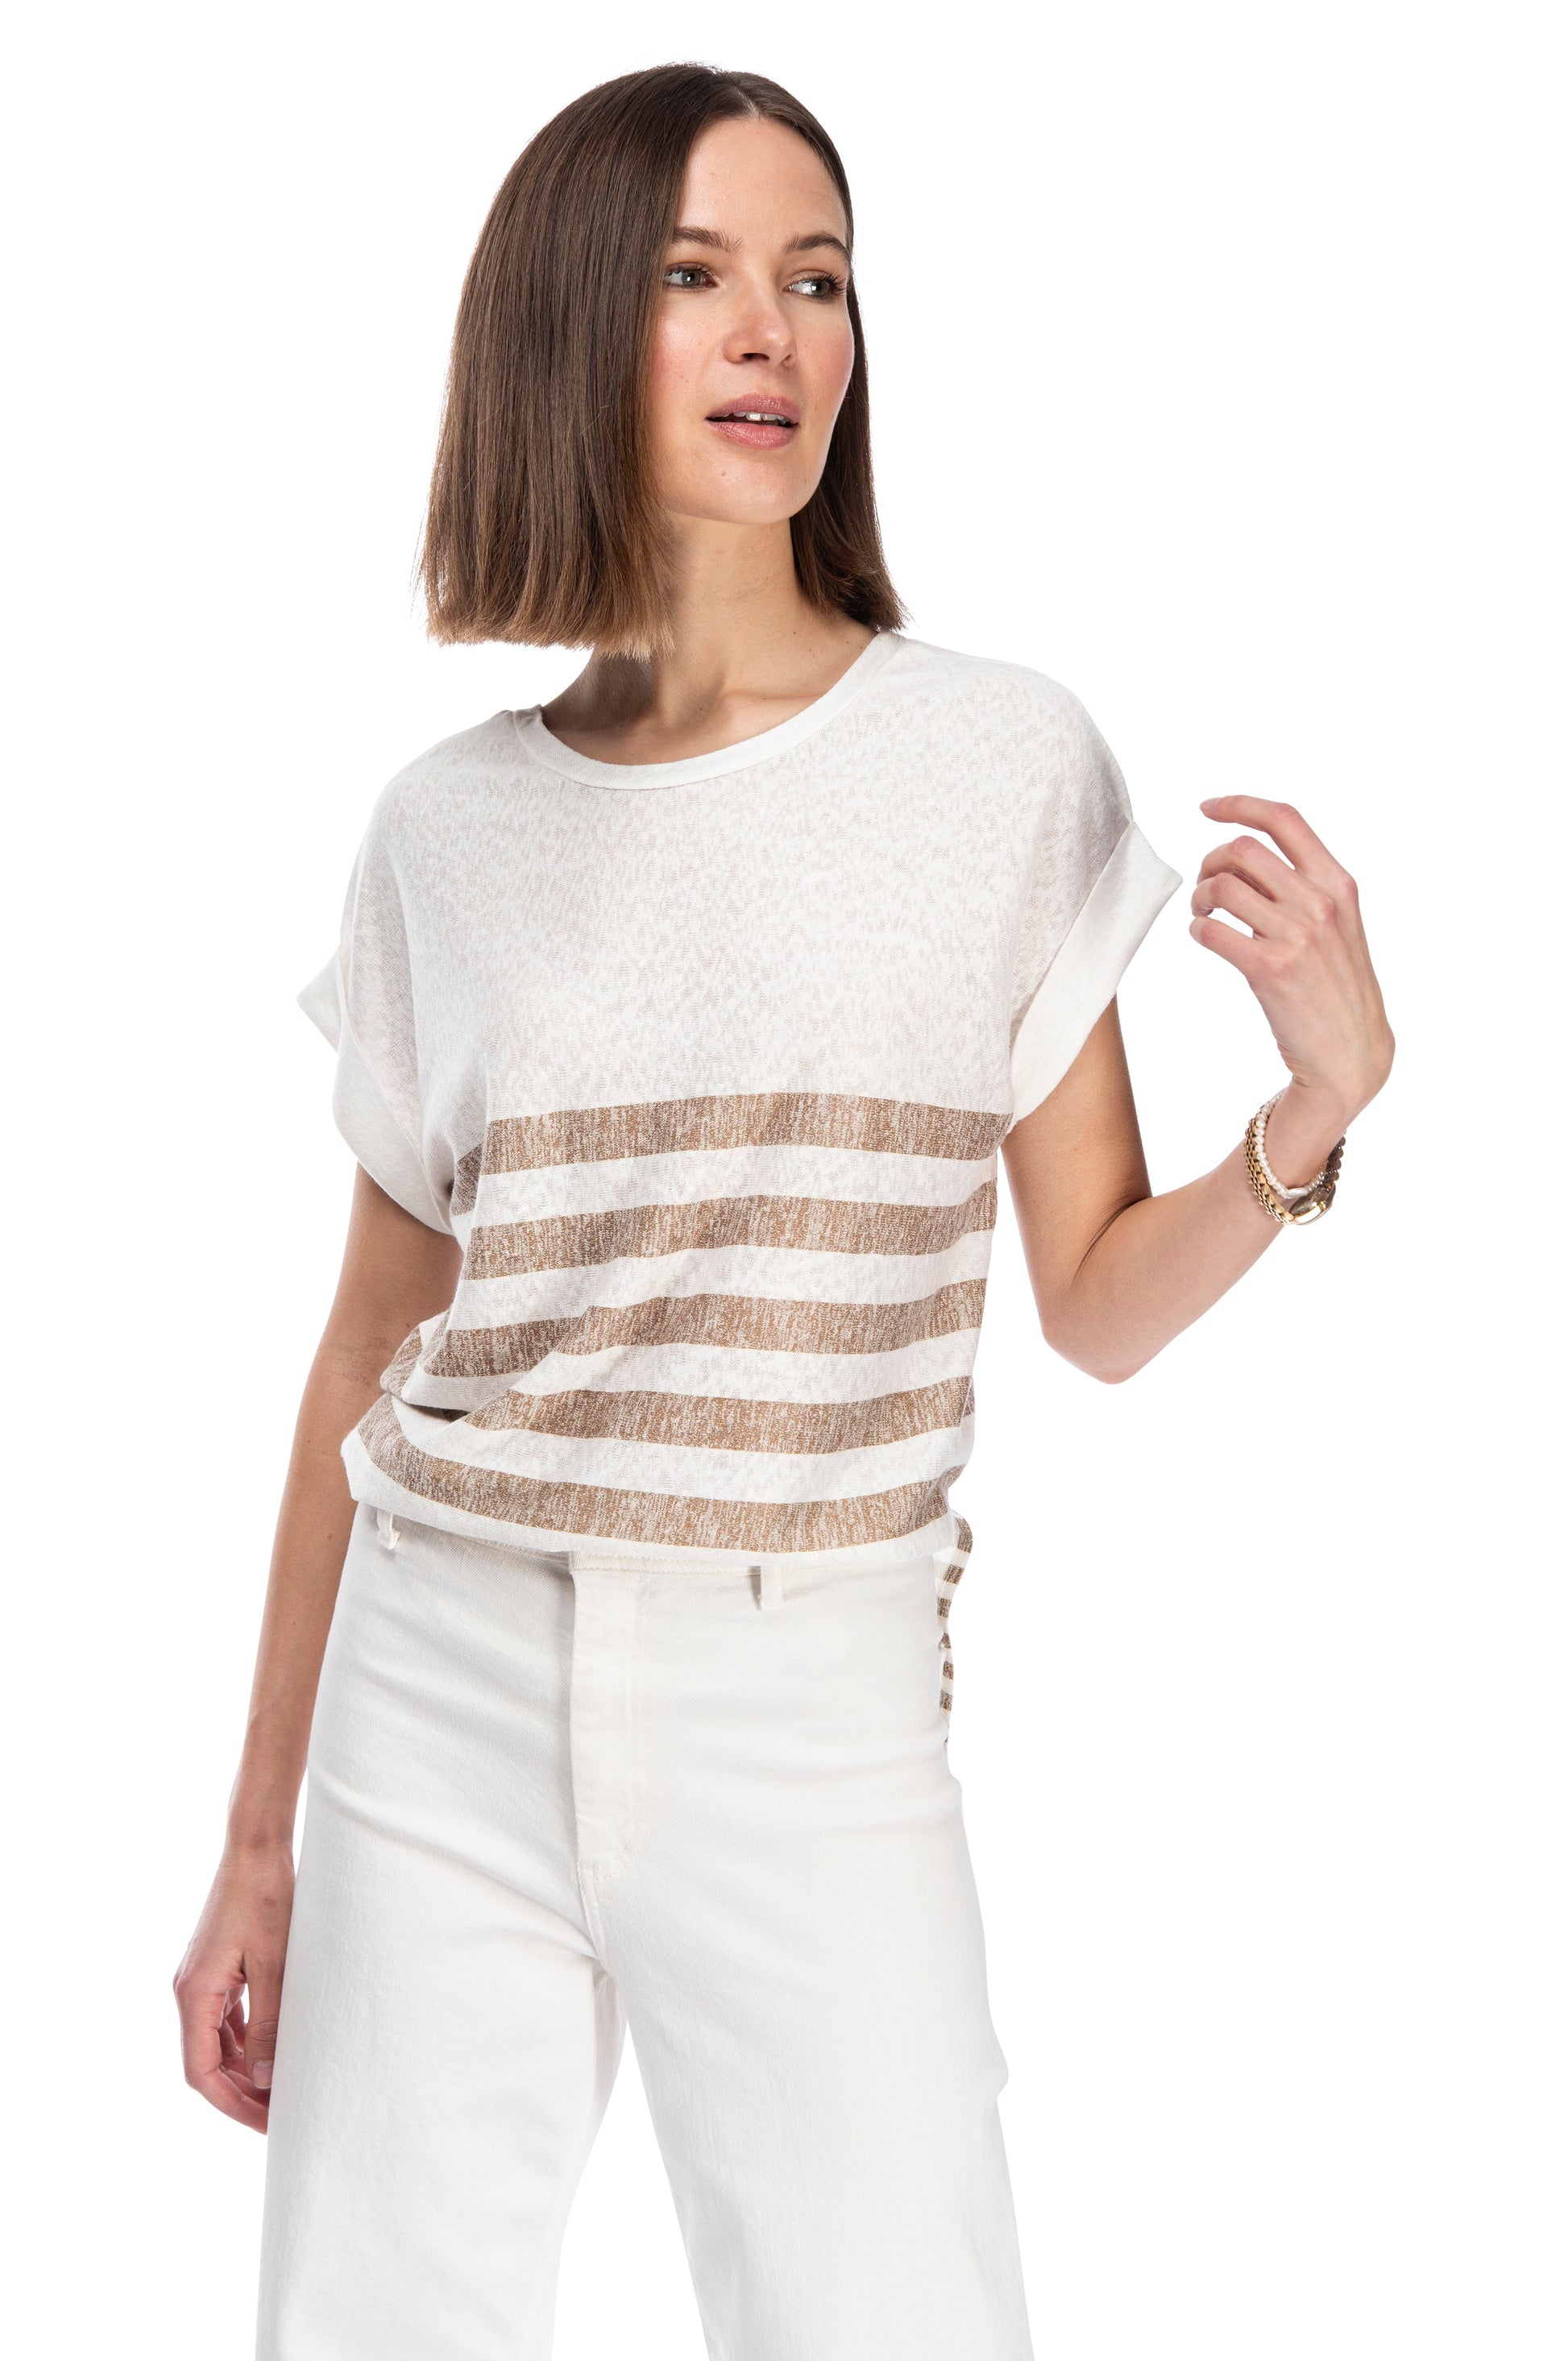 A woman in a casual white CATY STRAP TUNIC TEE by B Collection by Bobeau with placement stripe, paired with white pants, looking to the side with a contemplative expression.